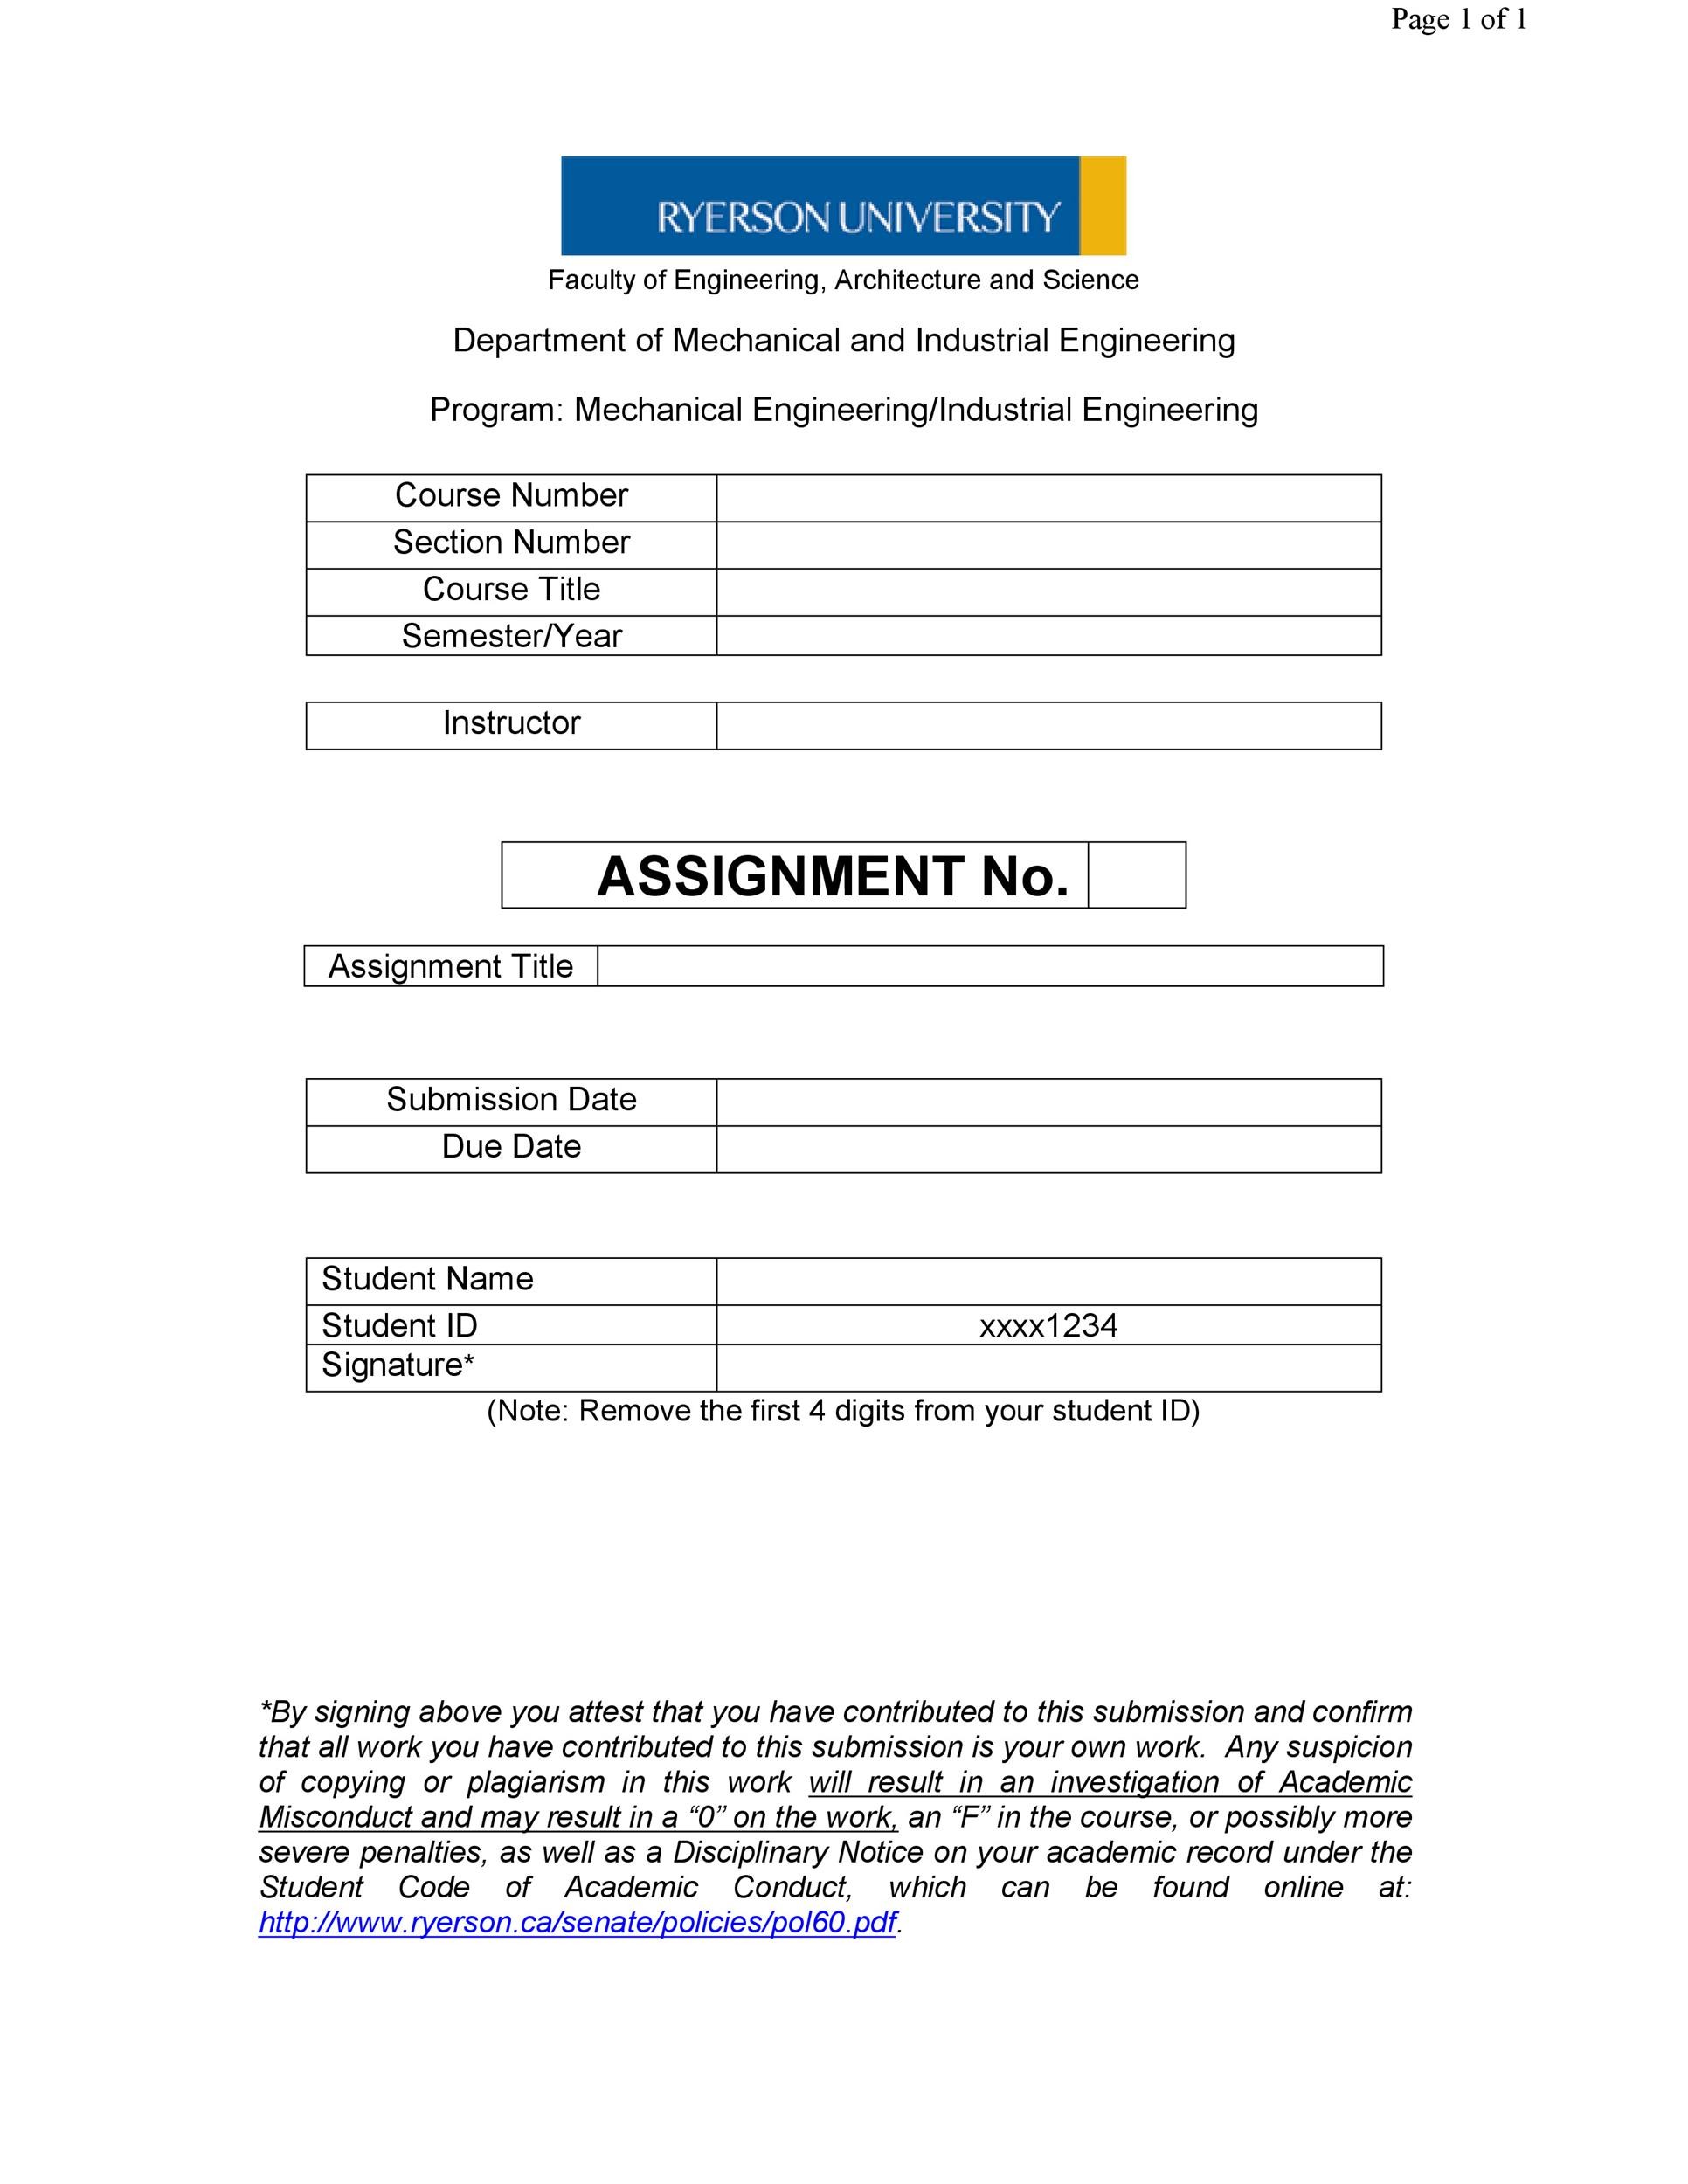 letter of assignment template